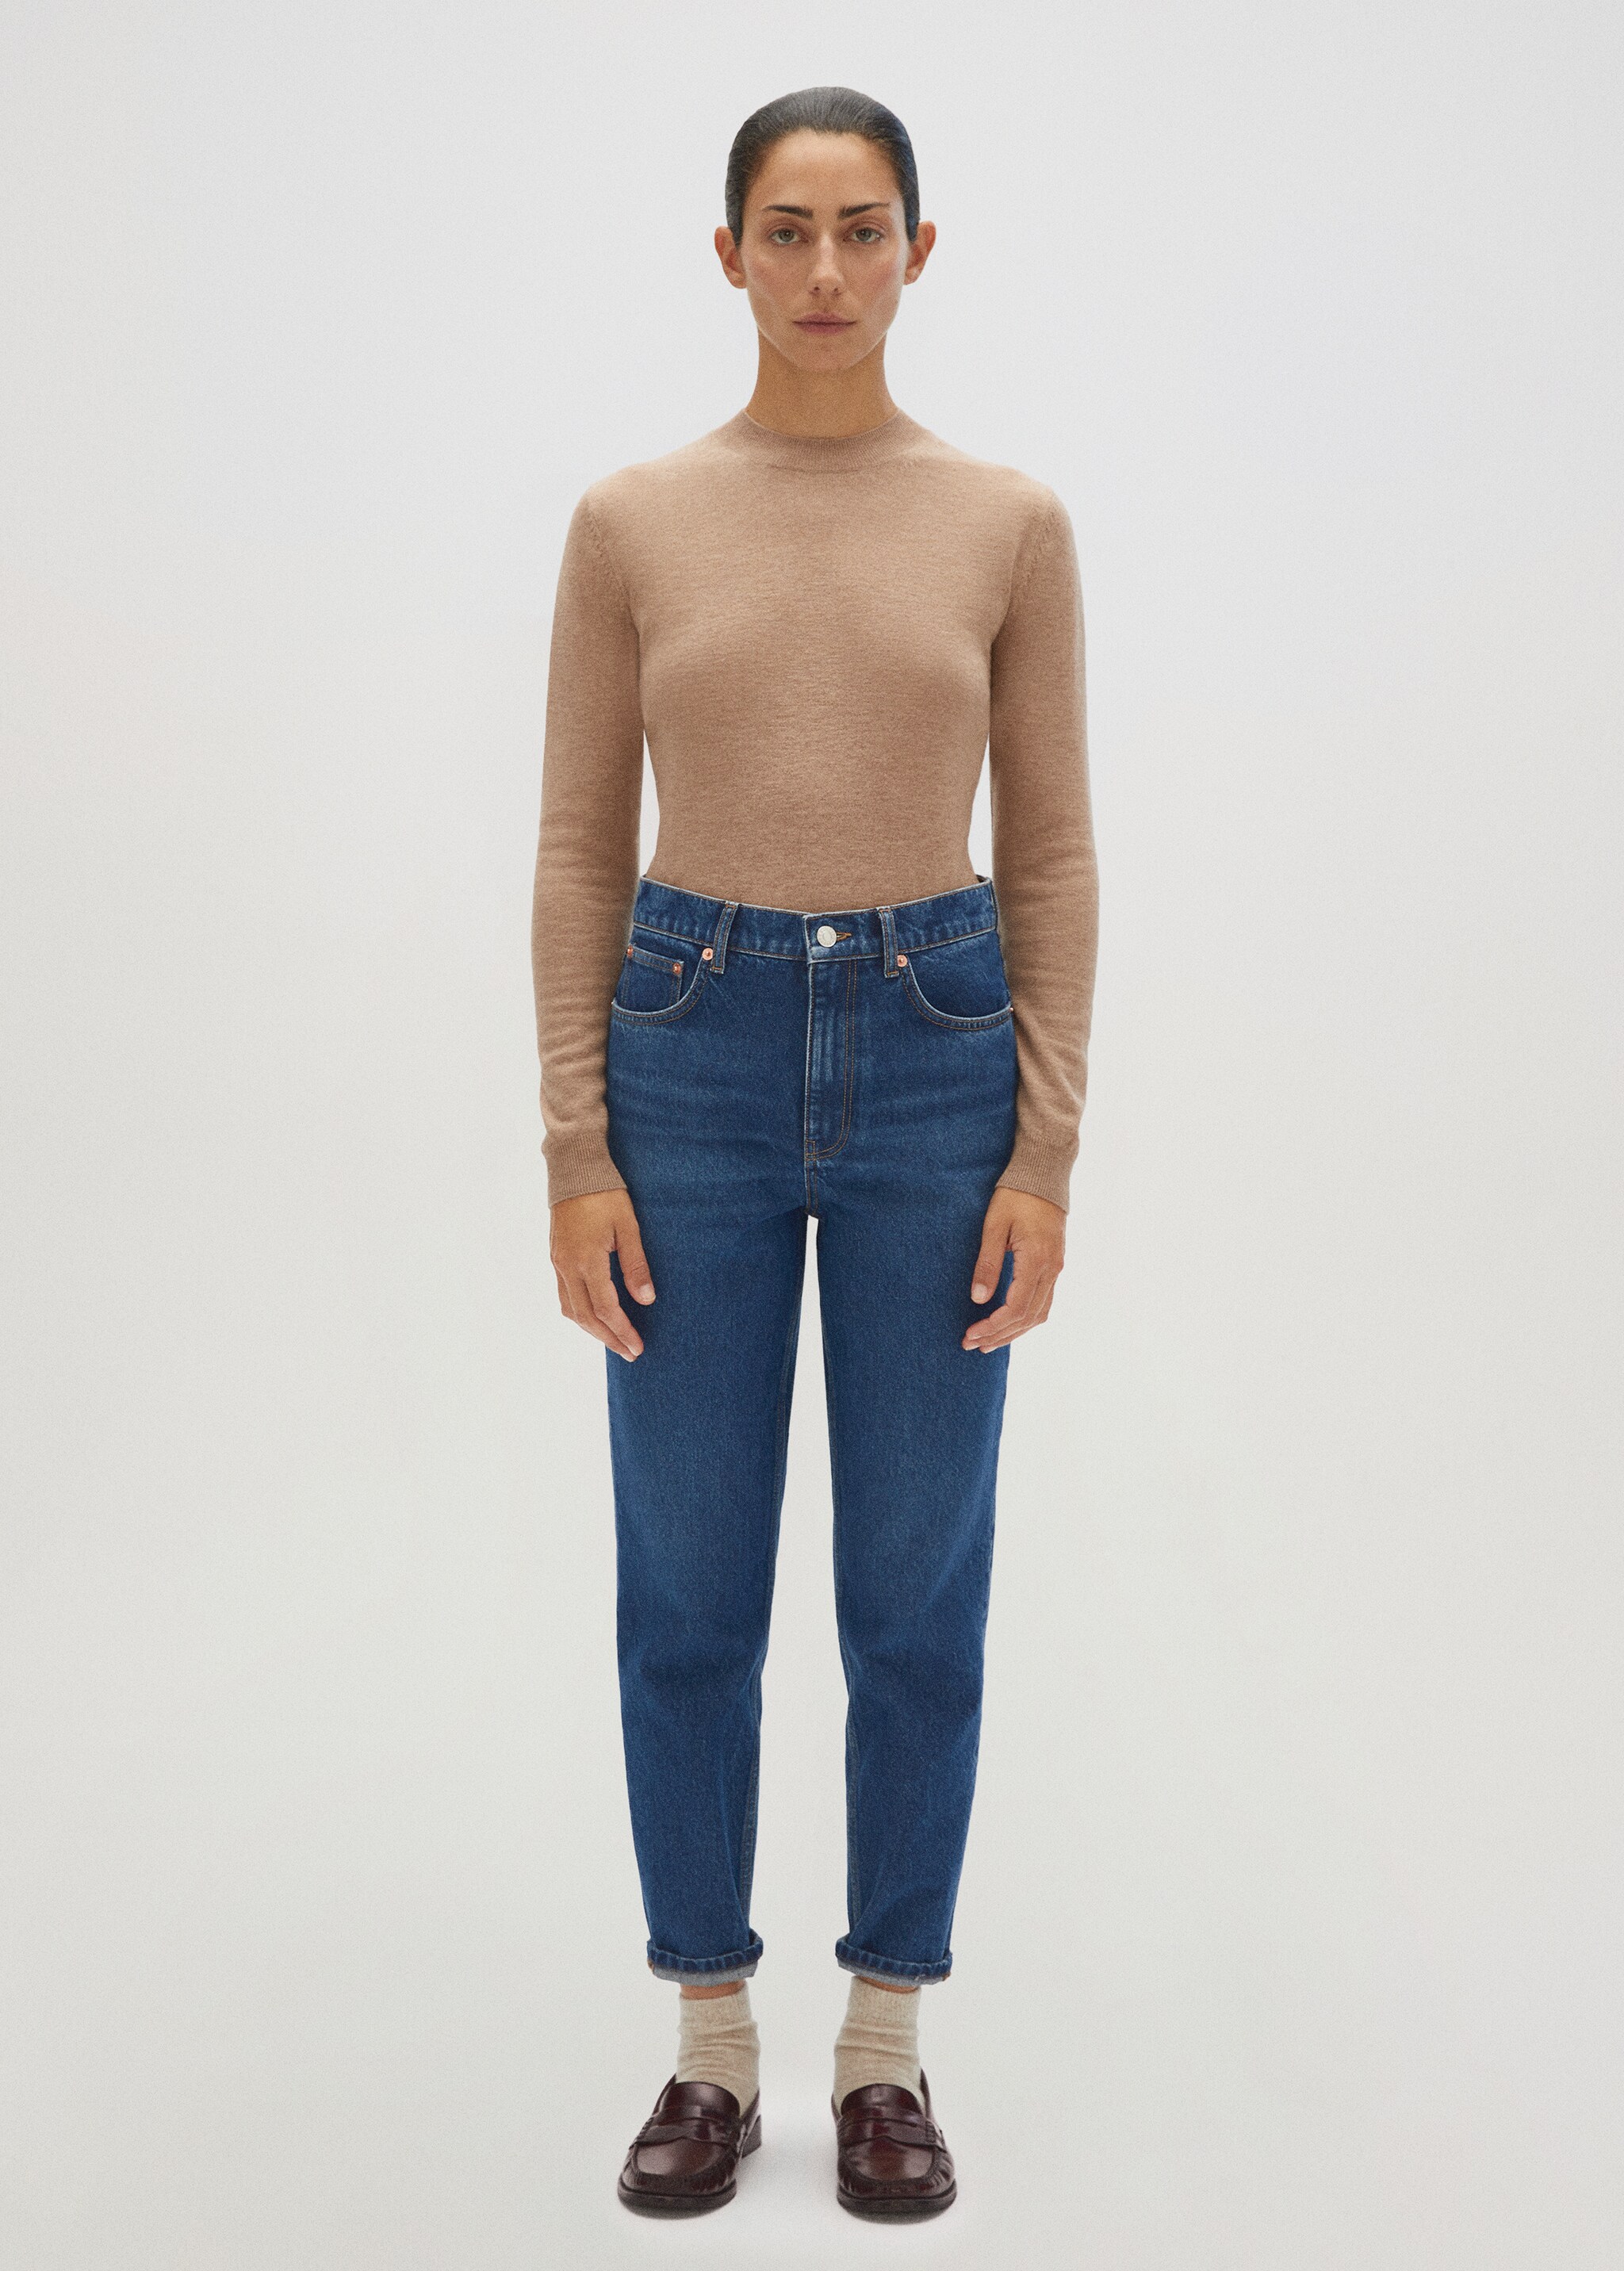 High collar wool sweater - Details of the article 7